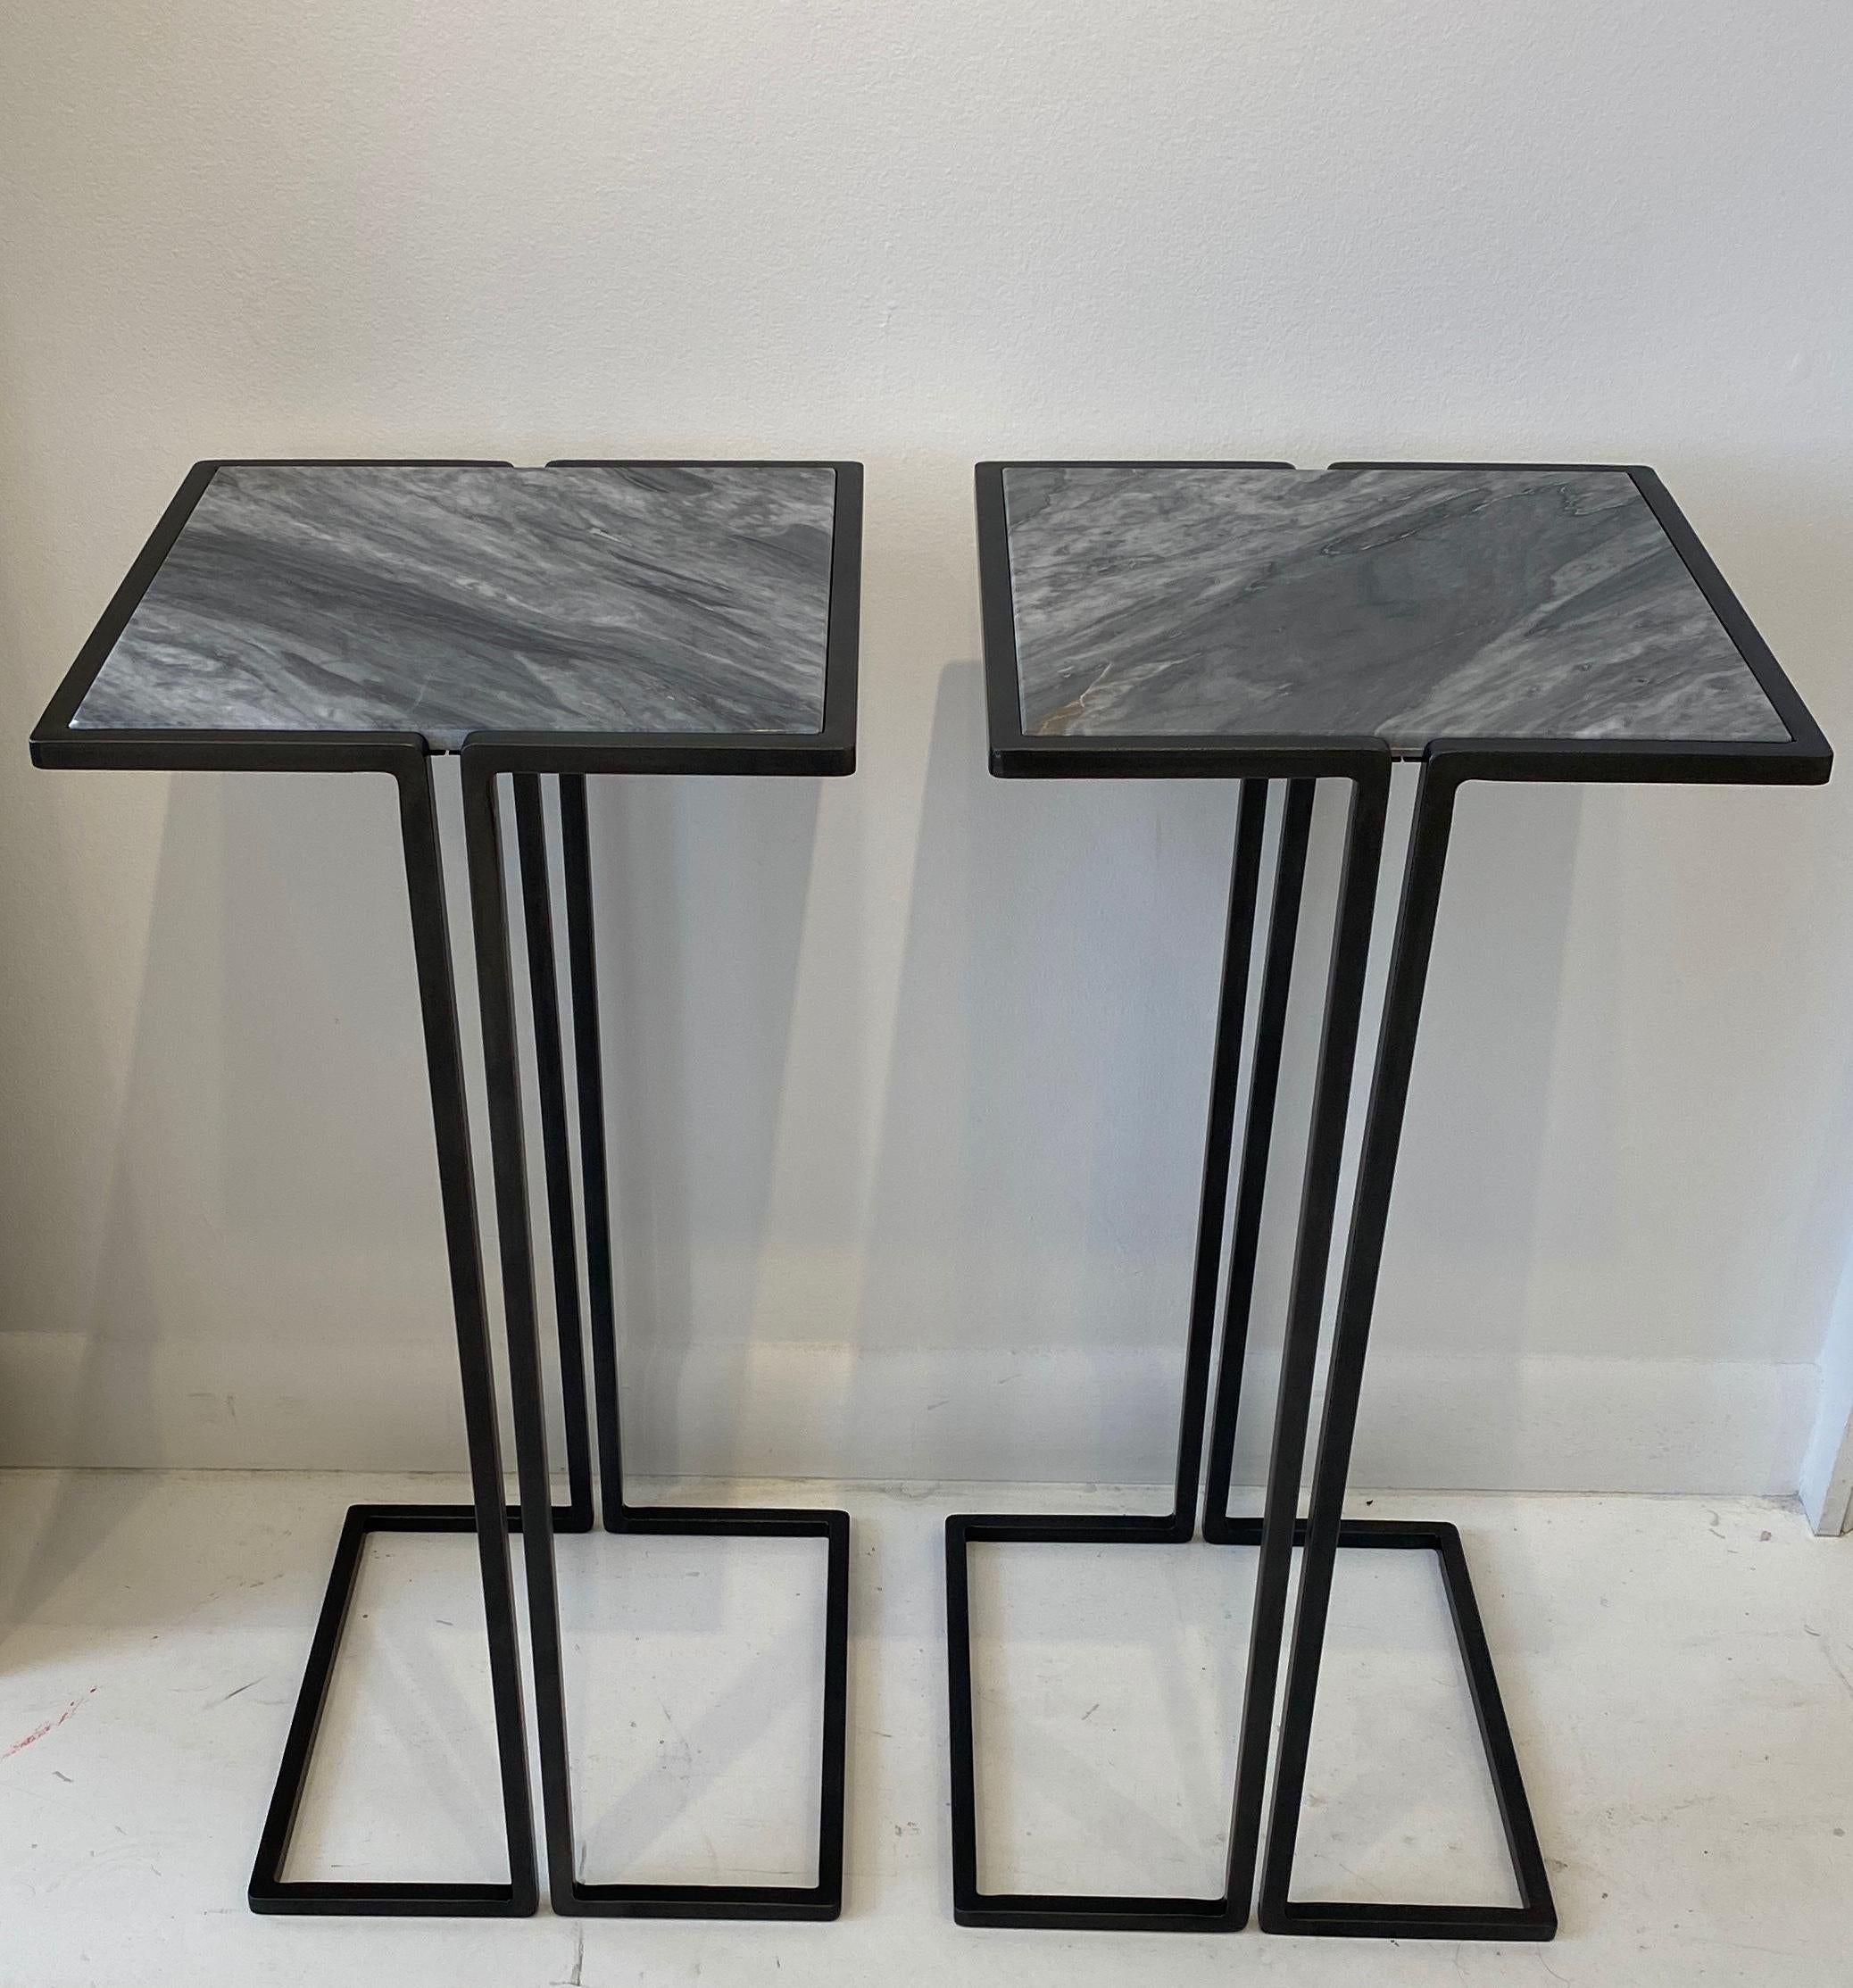 Two small-scale side tables. Minimalist design with gun metal patina frames and grey slate marble tops. Versatile tables, perfect for cocktails, laptops. These side tables nestle nicely around the arms of chairs to provide a nice sized multi-use